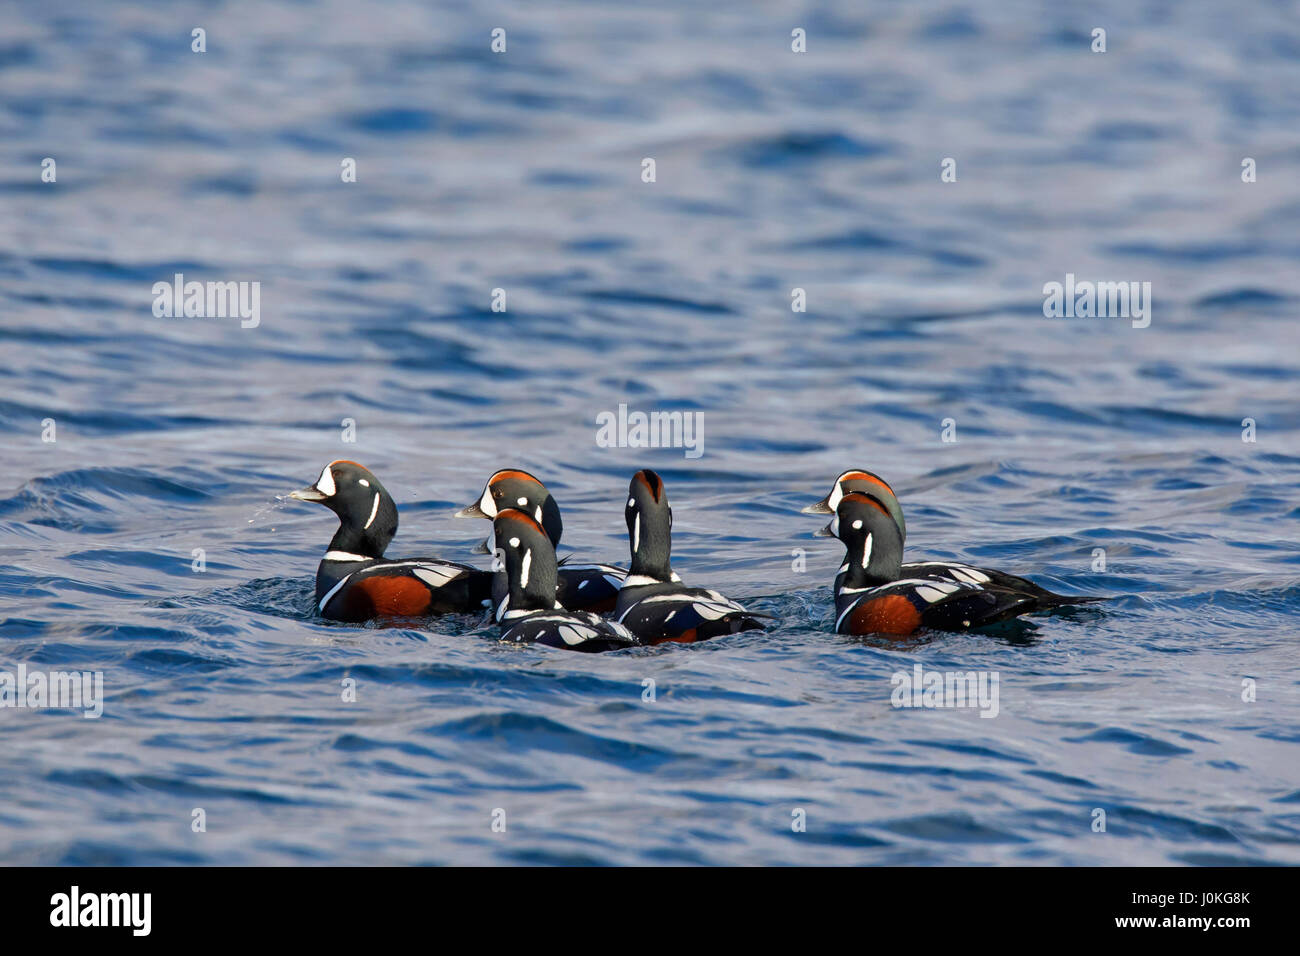 Harlequin ducks (Histrionicus histrionicus), flock of males swimming at sea in winter Stock Photo